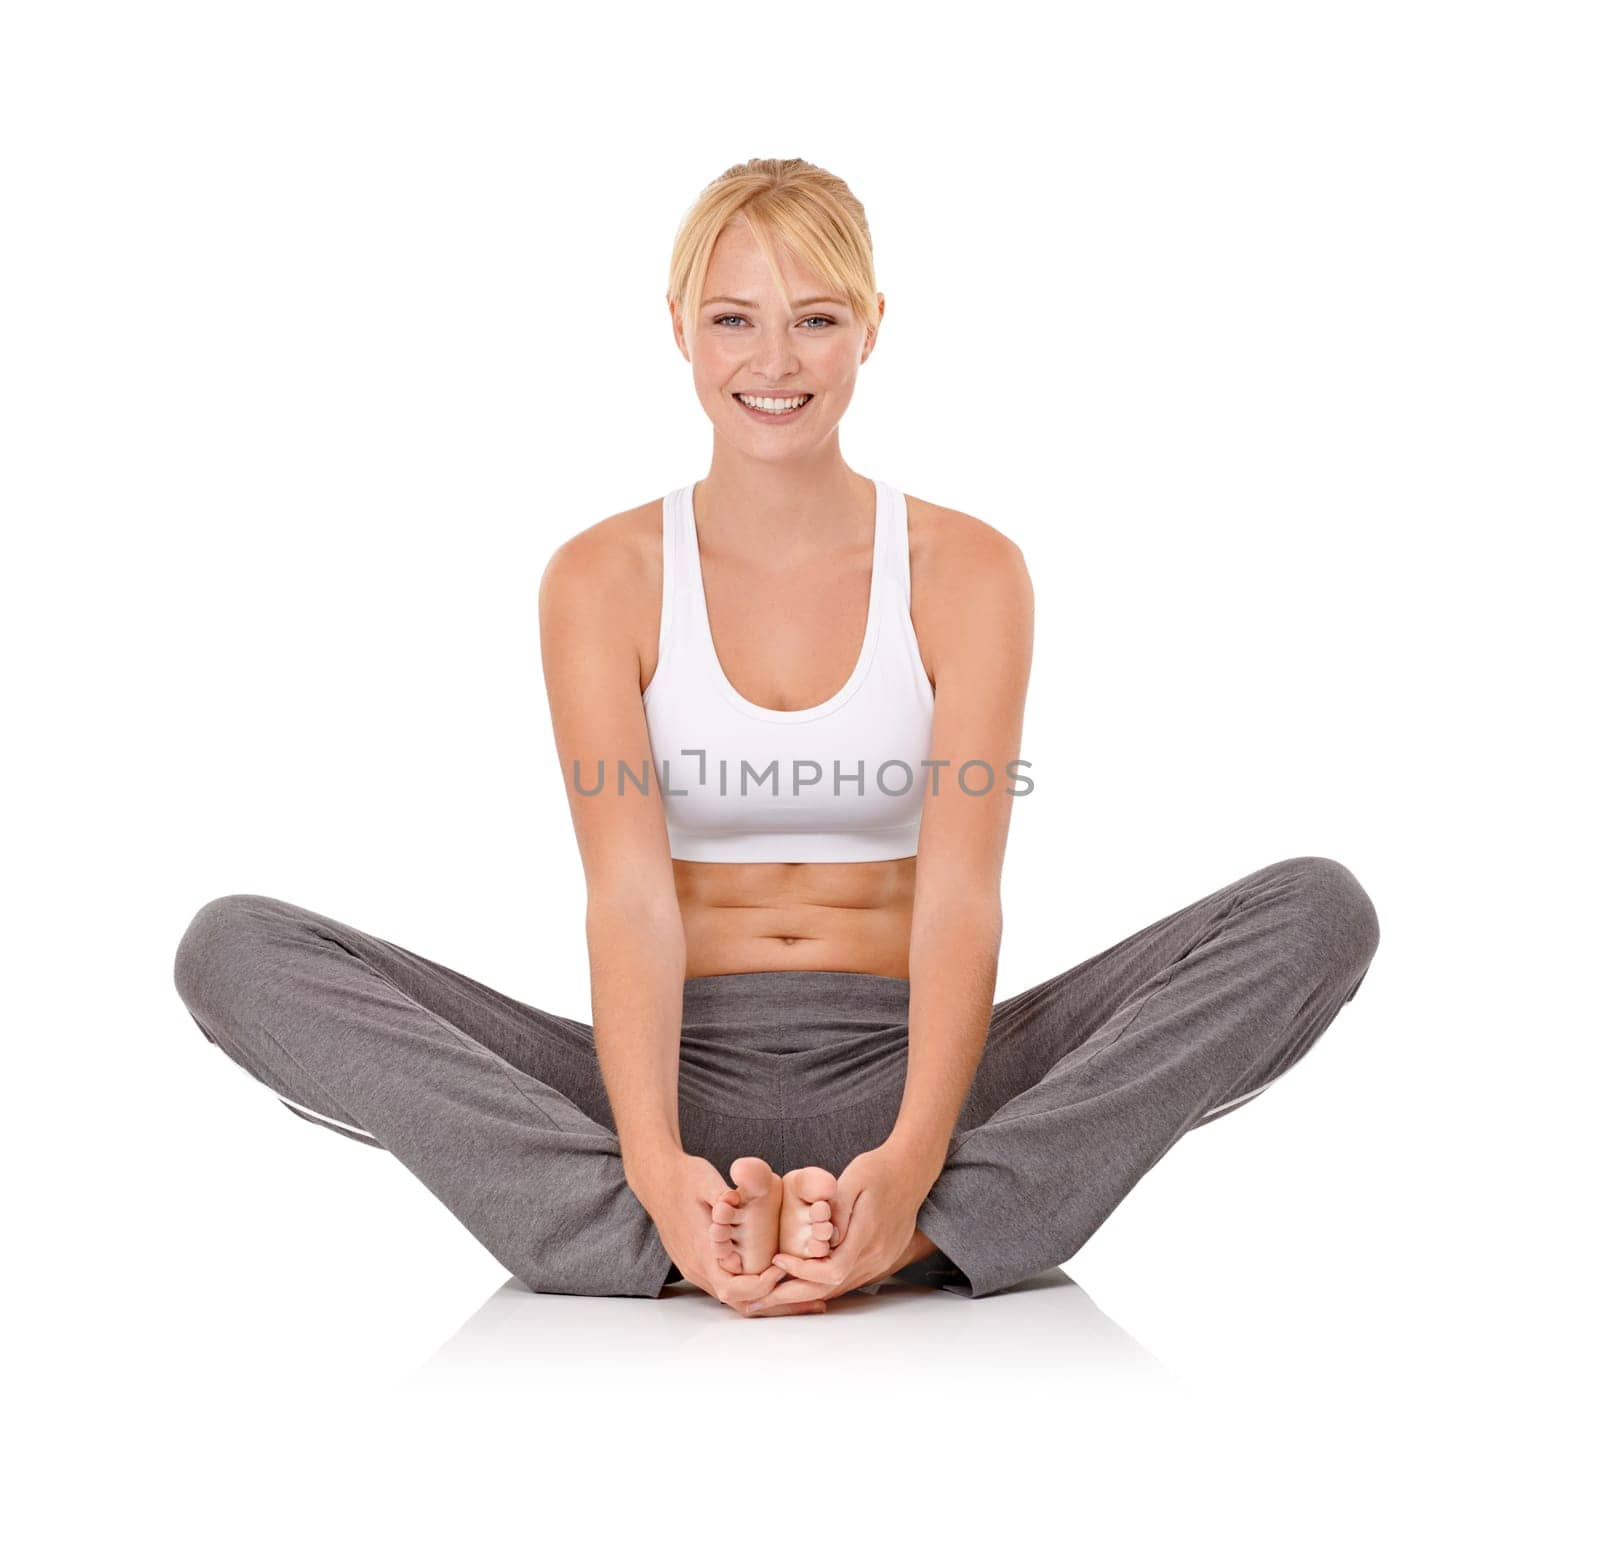 Shes stretching before her next workout. Portrait of an attractive young woman stretching against a white background